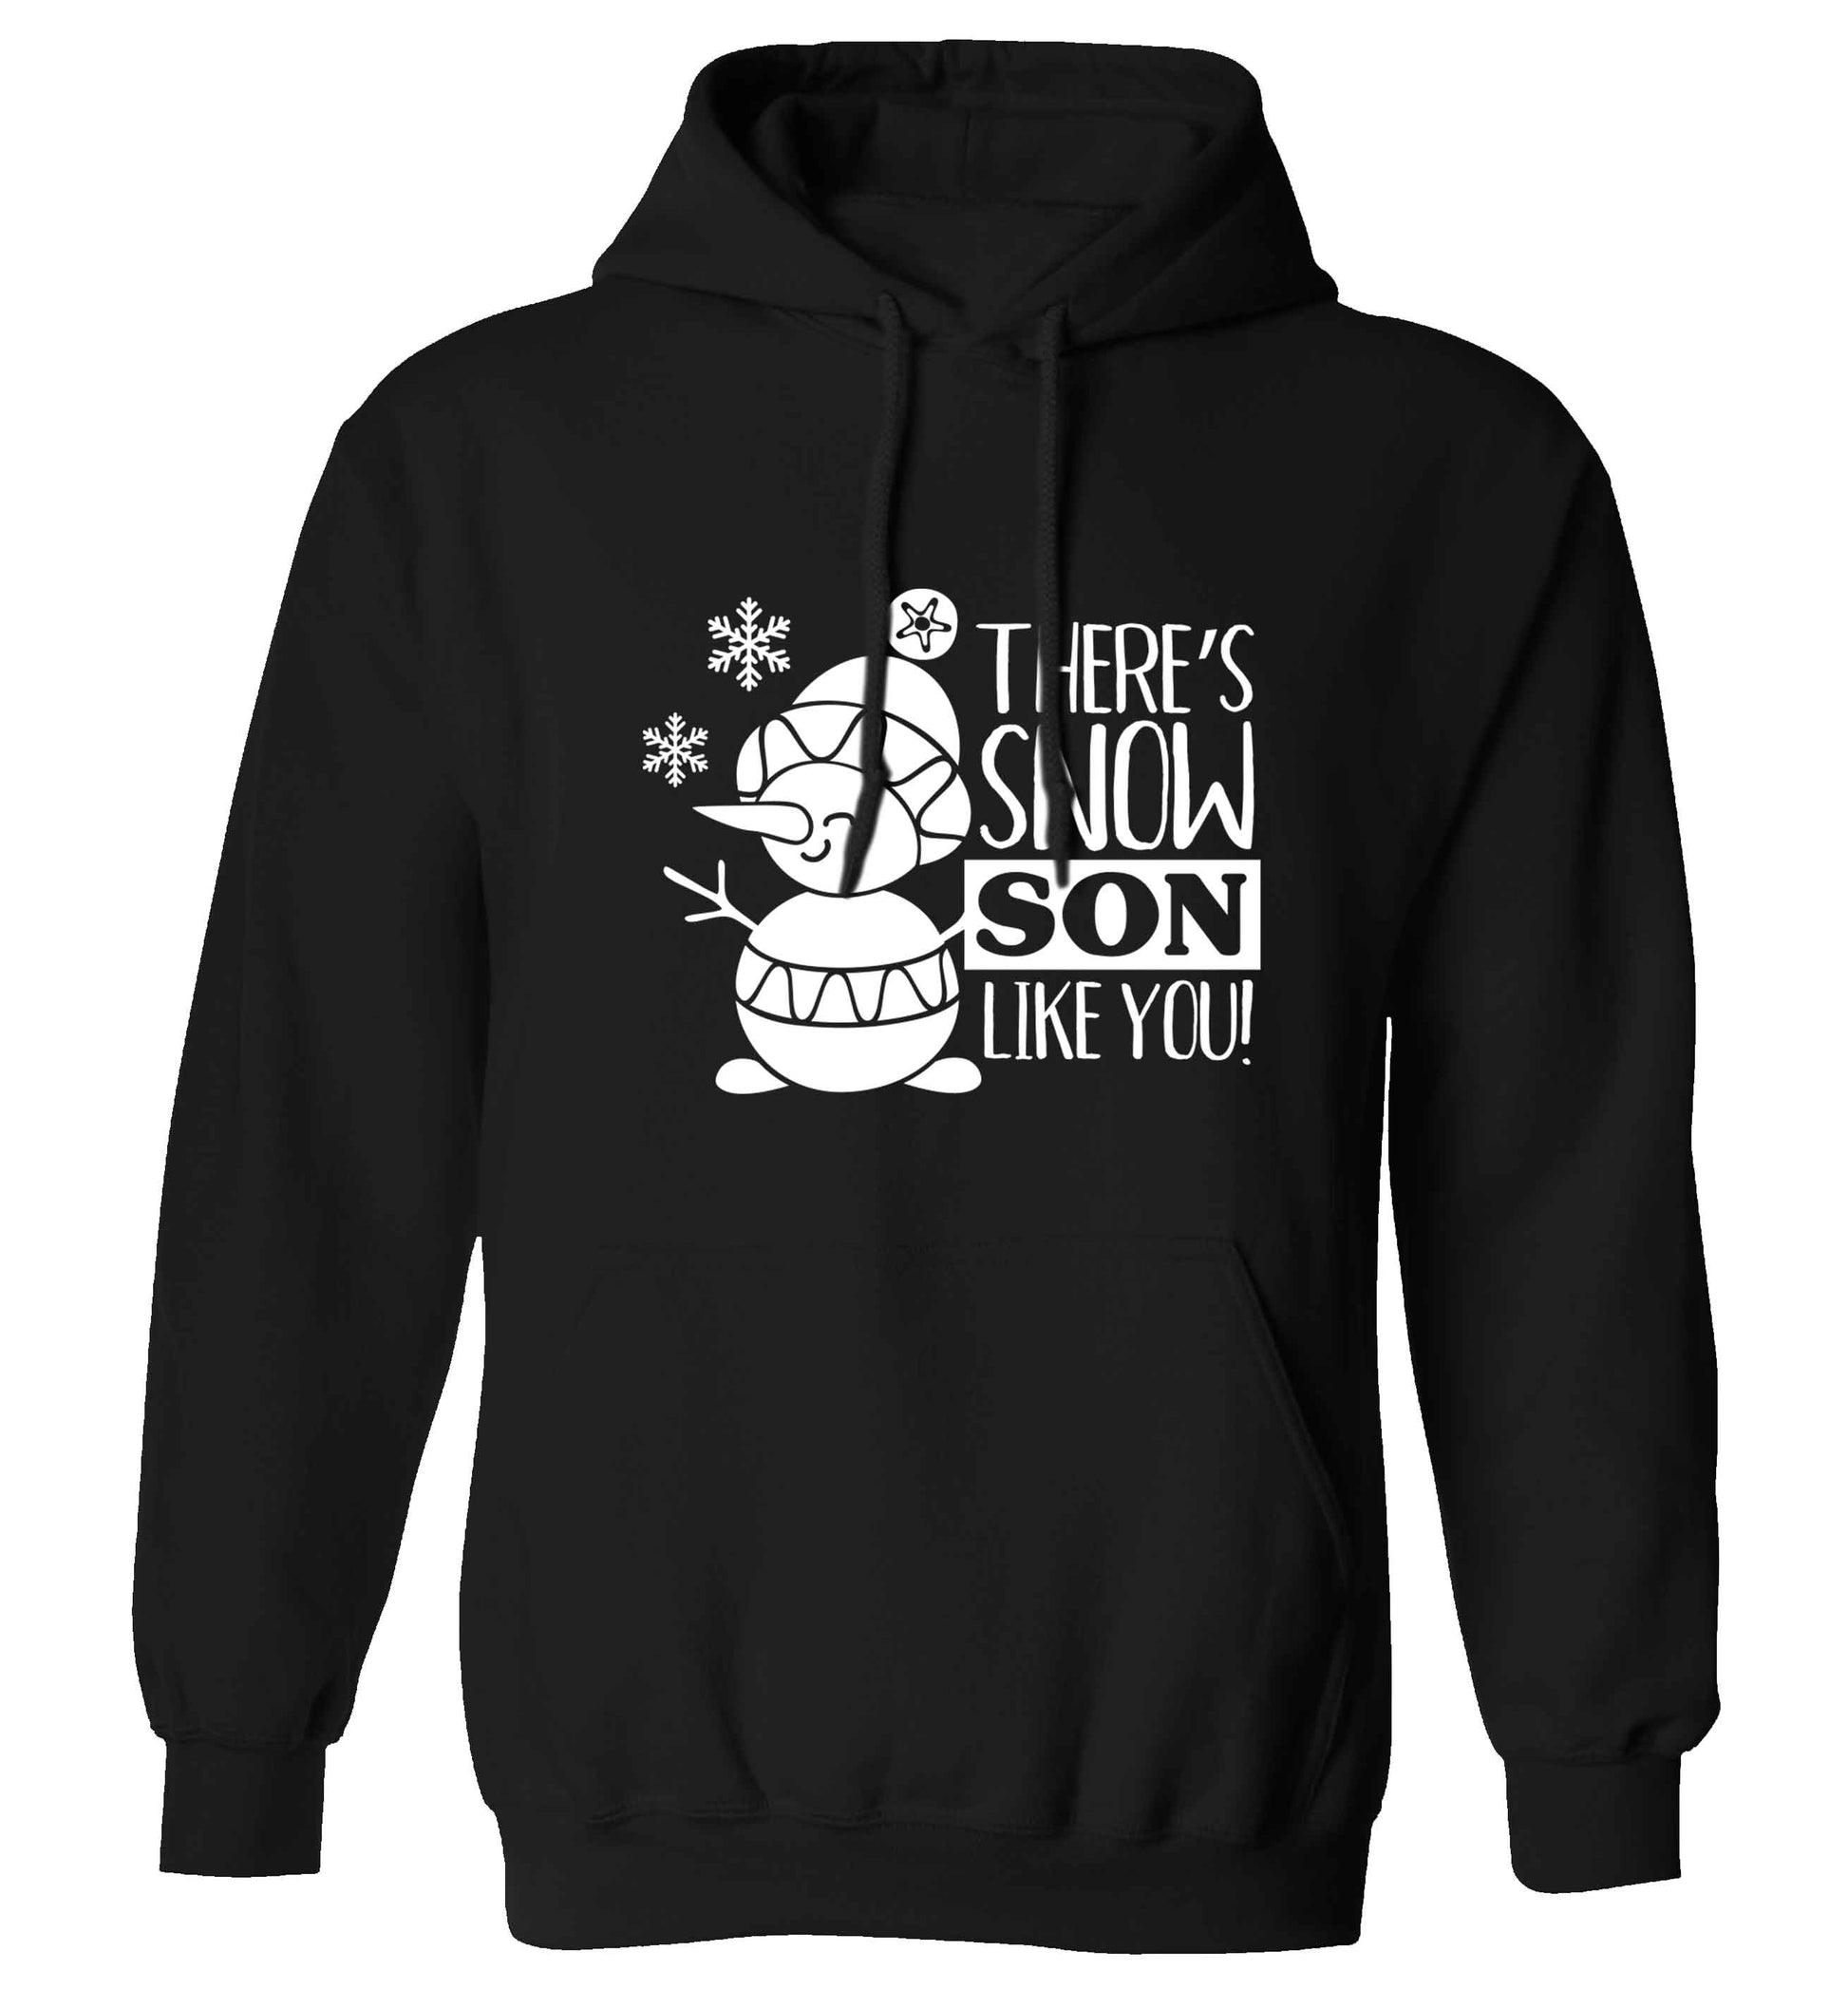 There's snow son like you adults unisex black hoodie 2XL